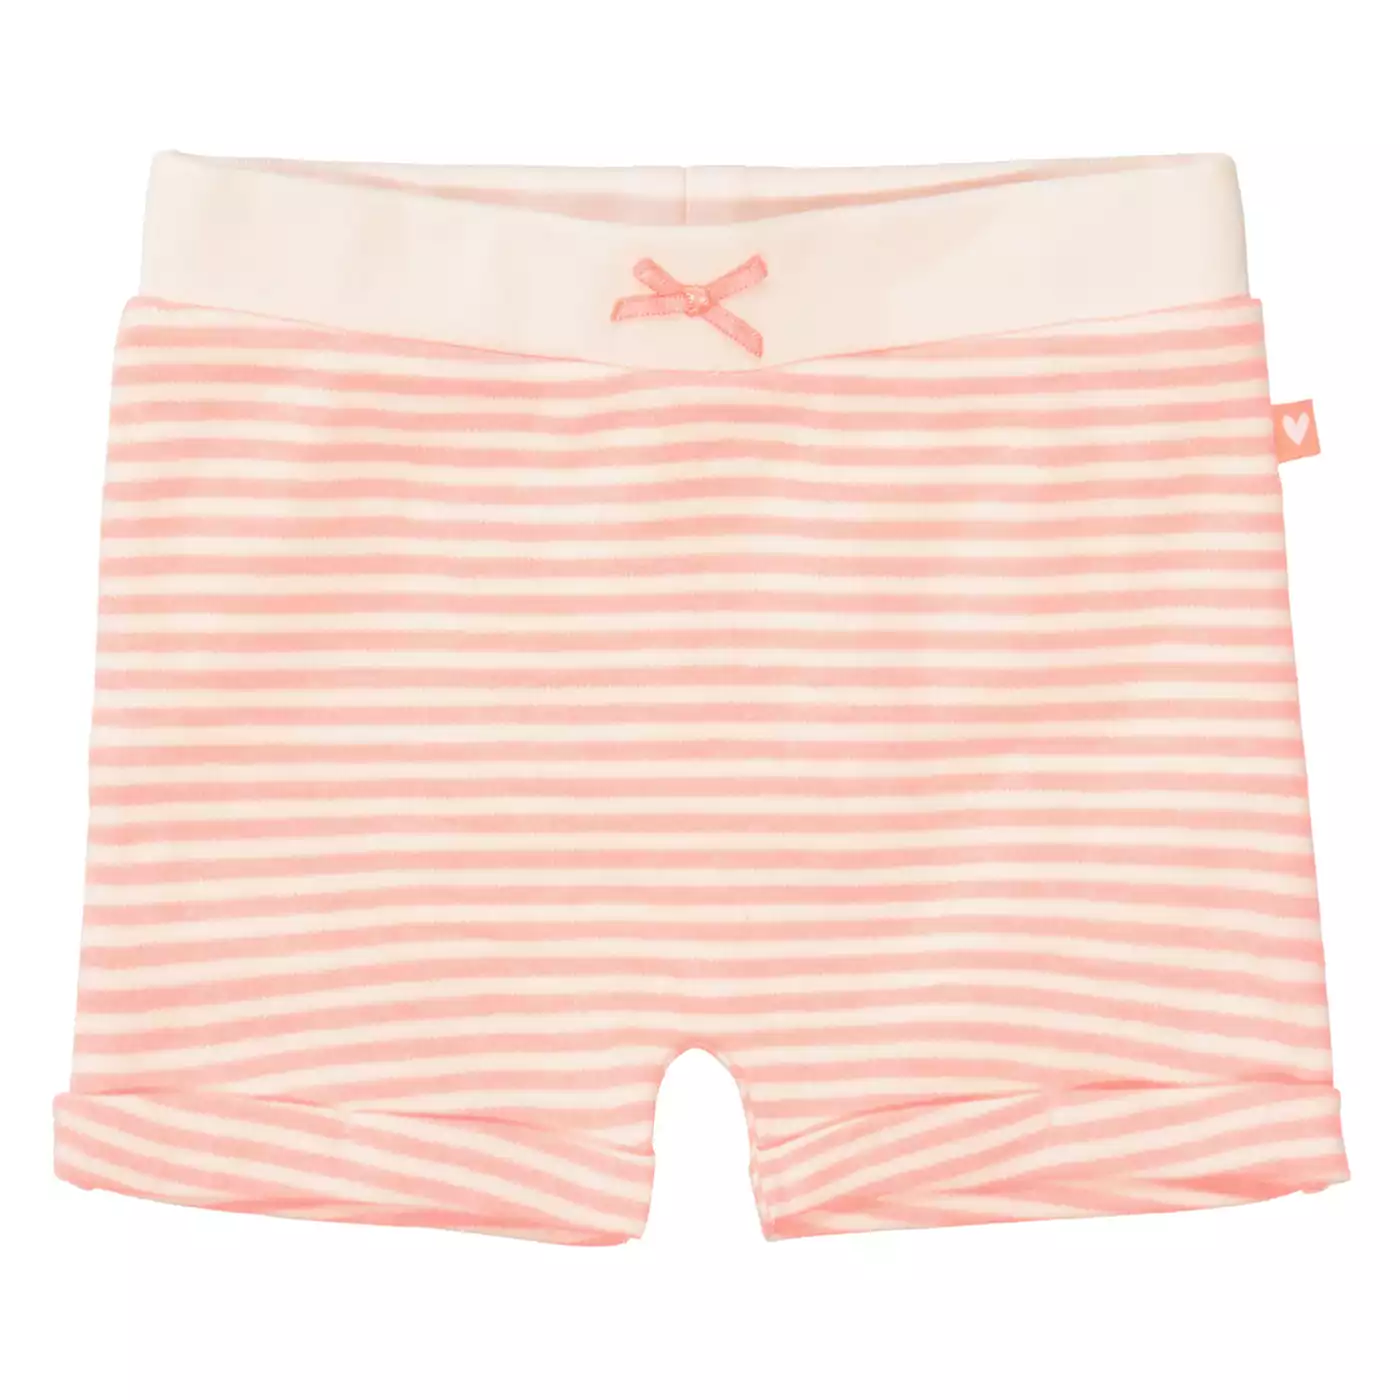 Shorts Neon Coral STACCATO Pink Rosa M2004580296103 3